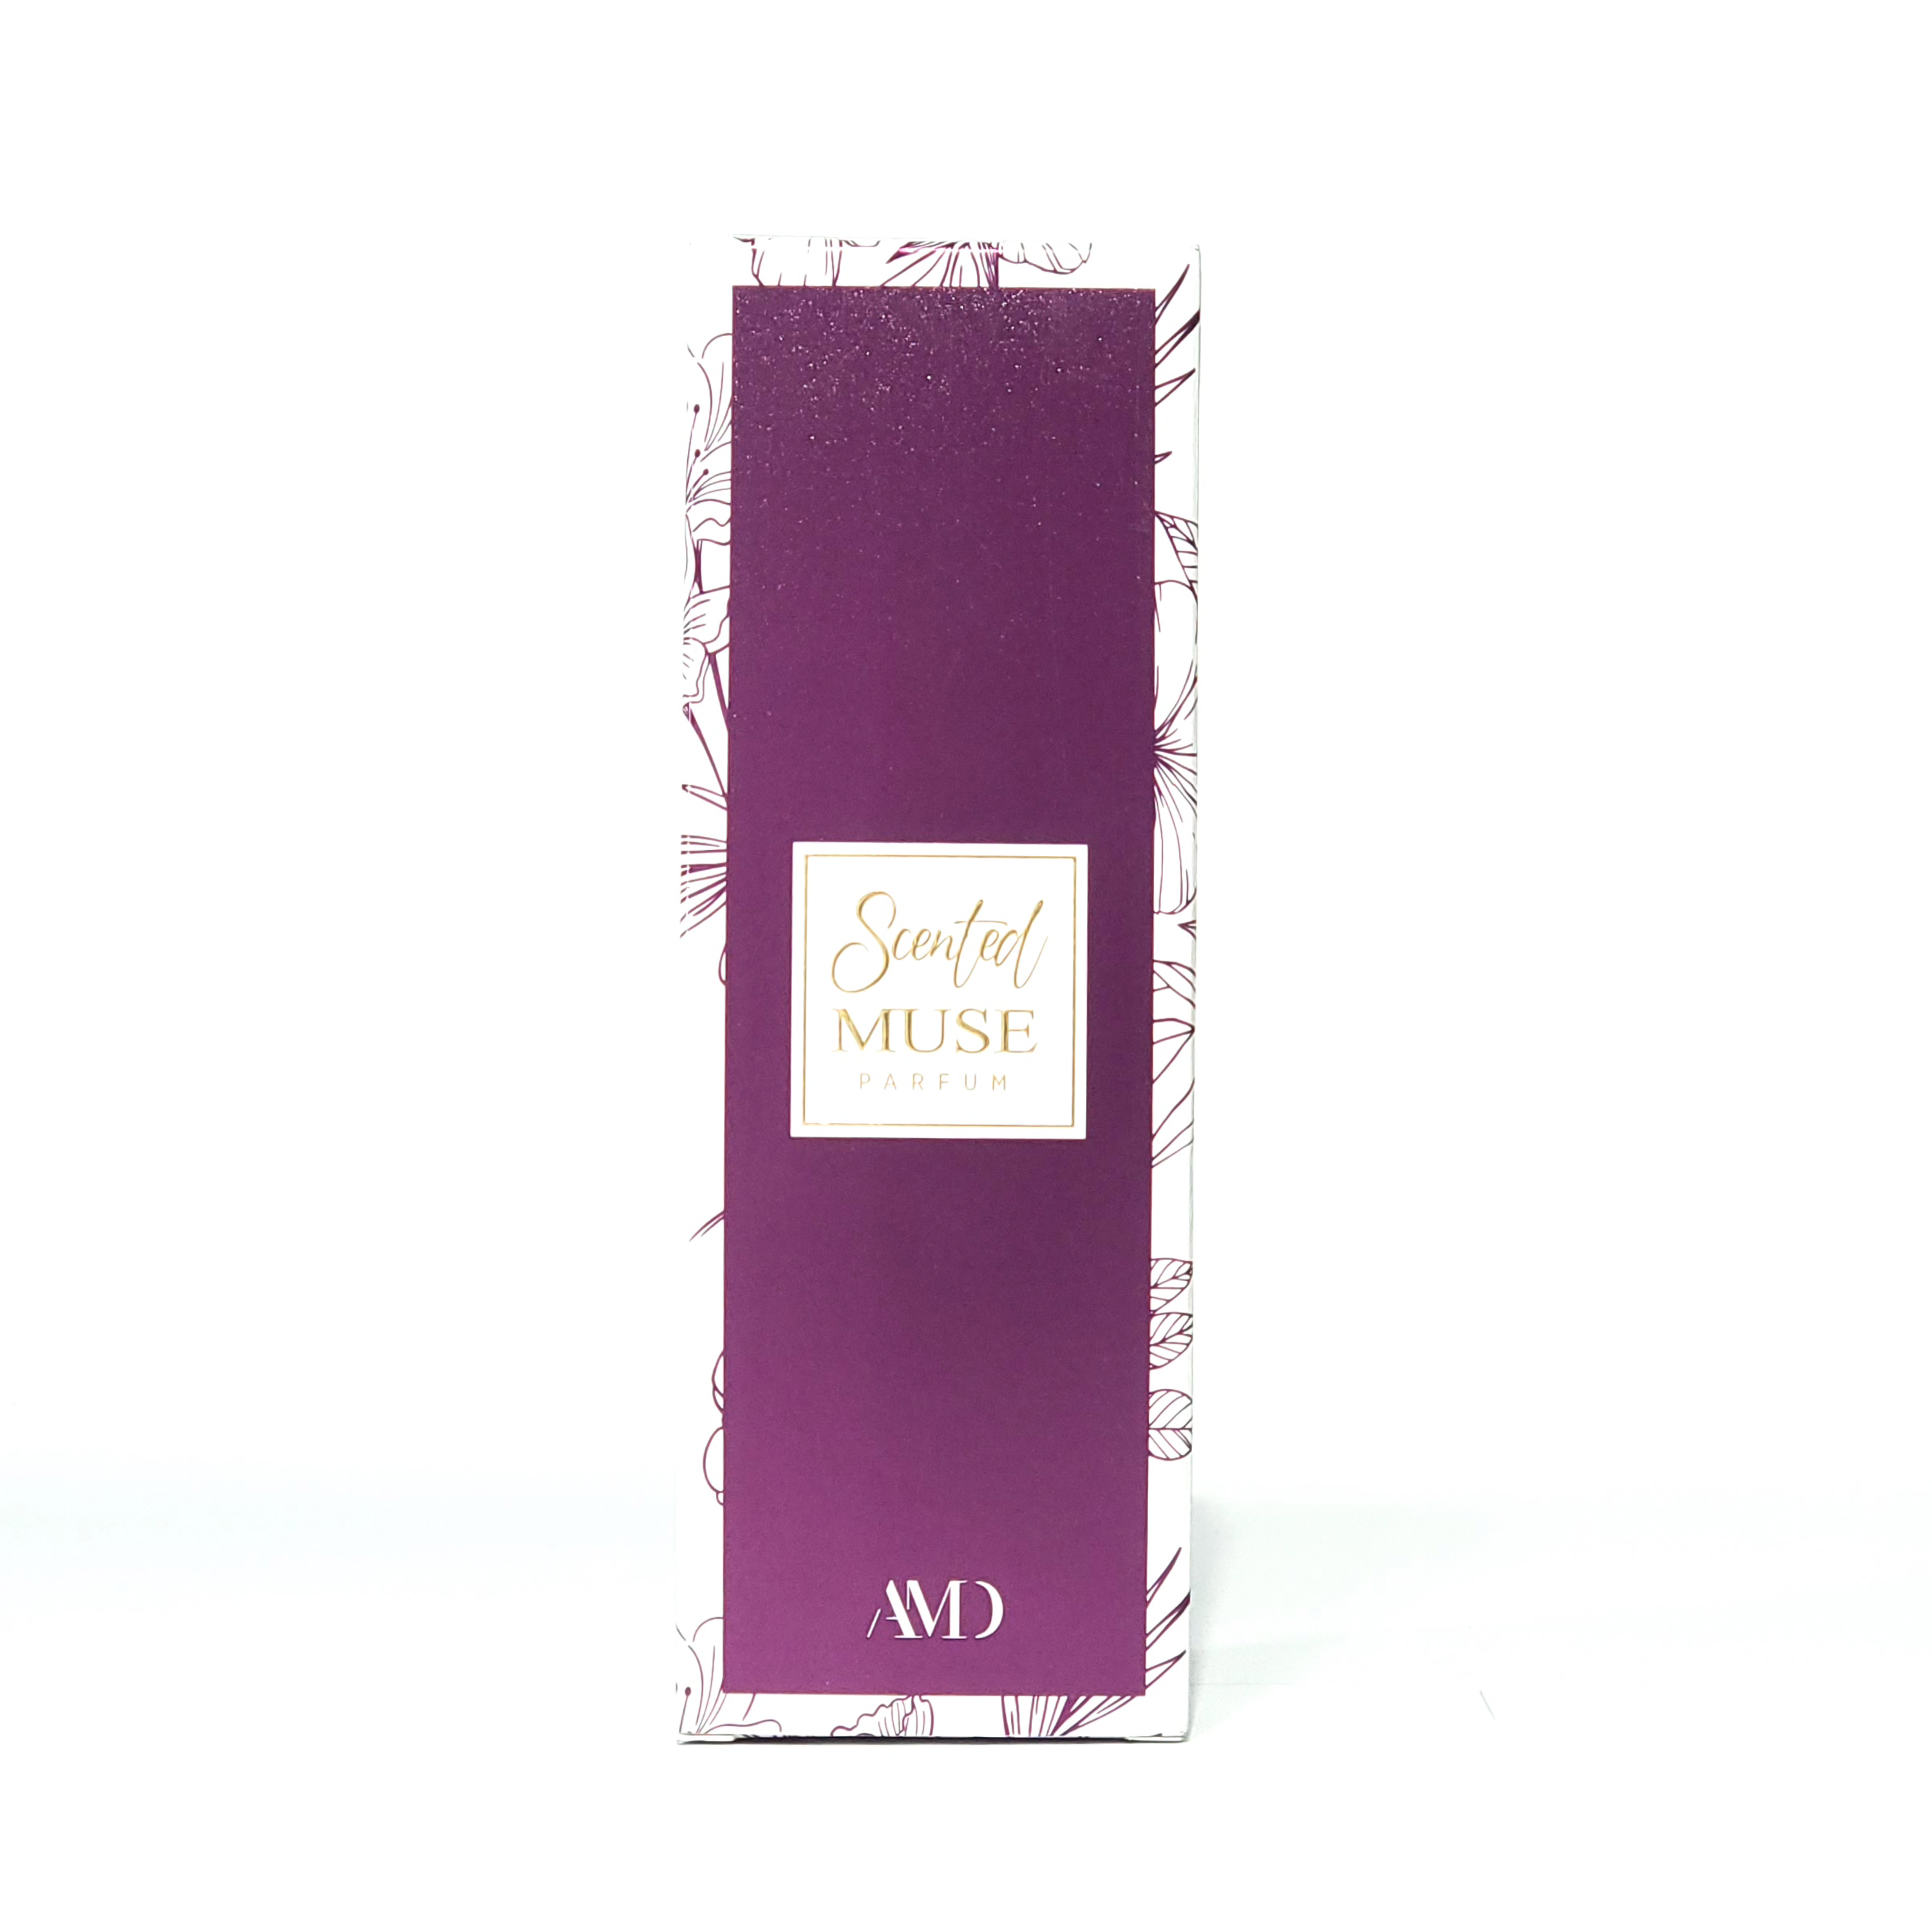 SCENTED MUSE - AMD PERFUMES